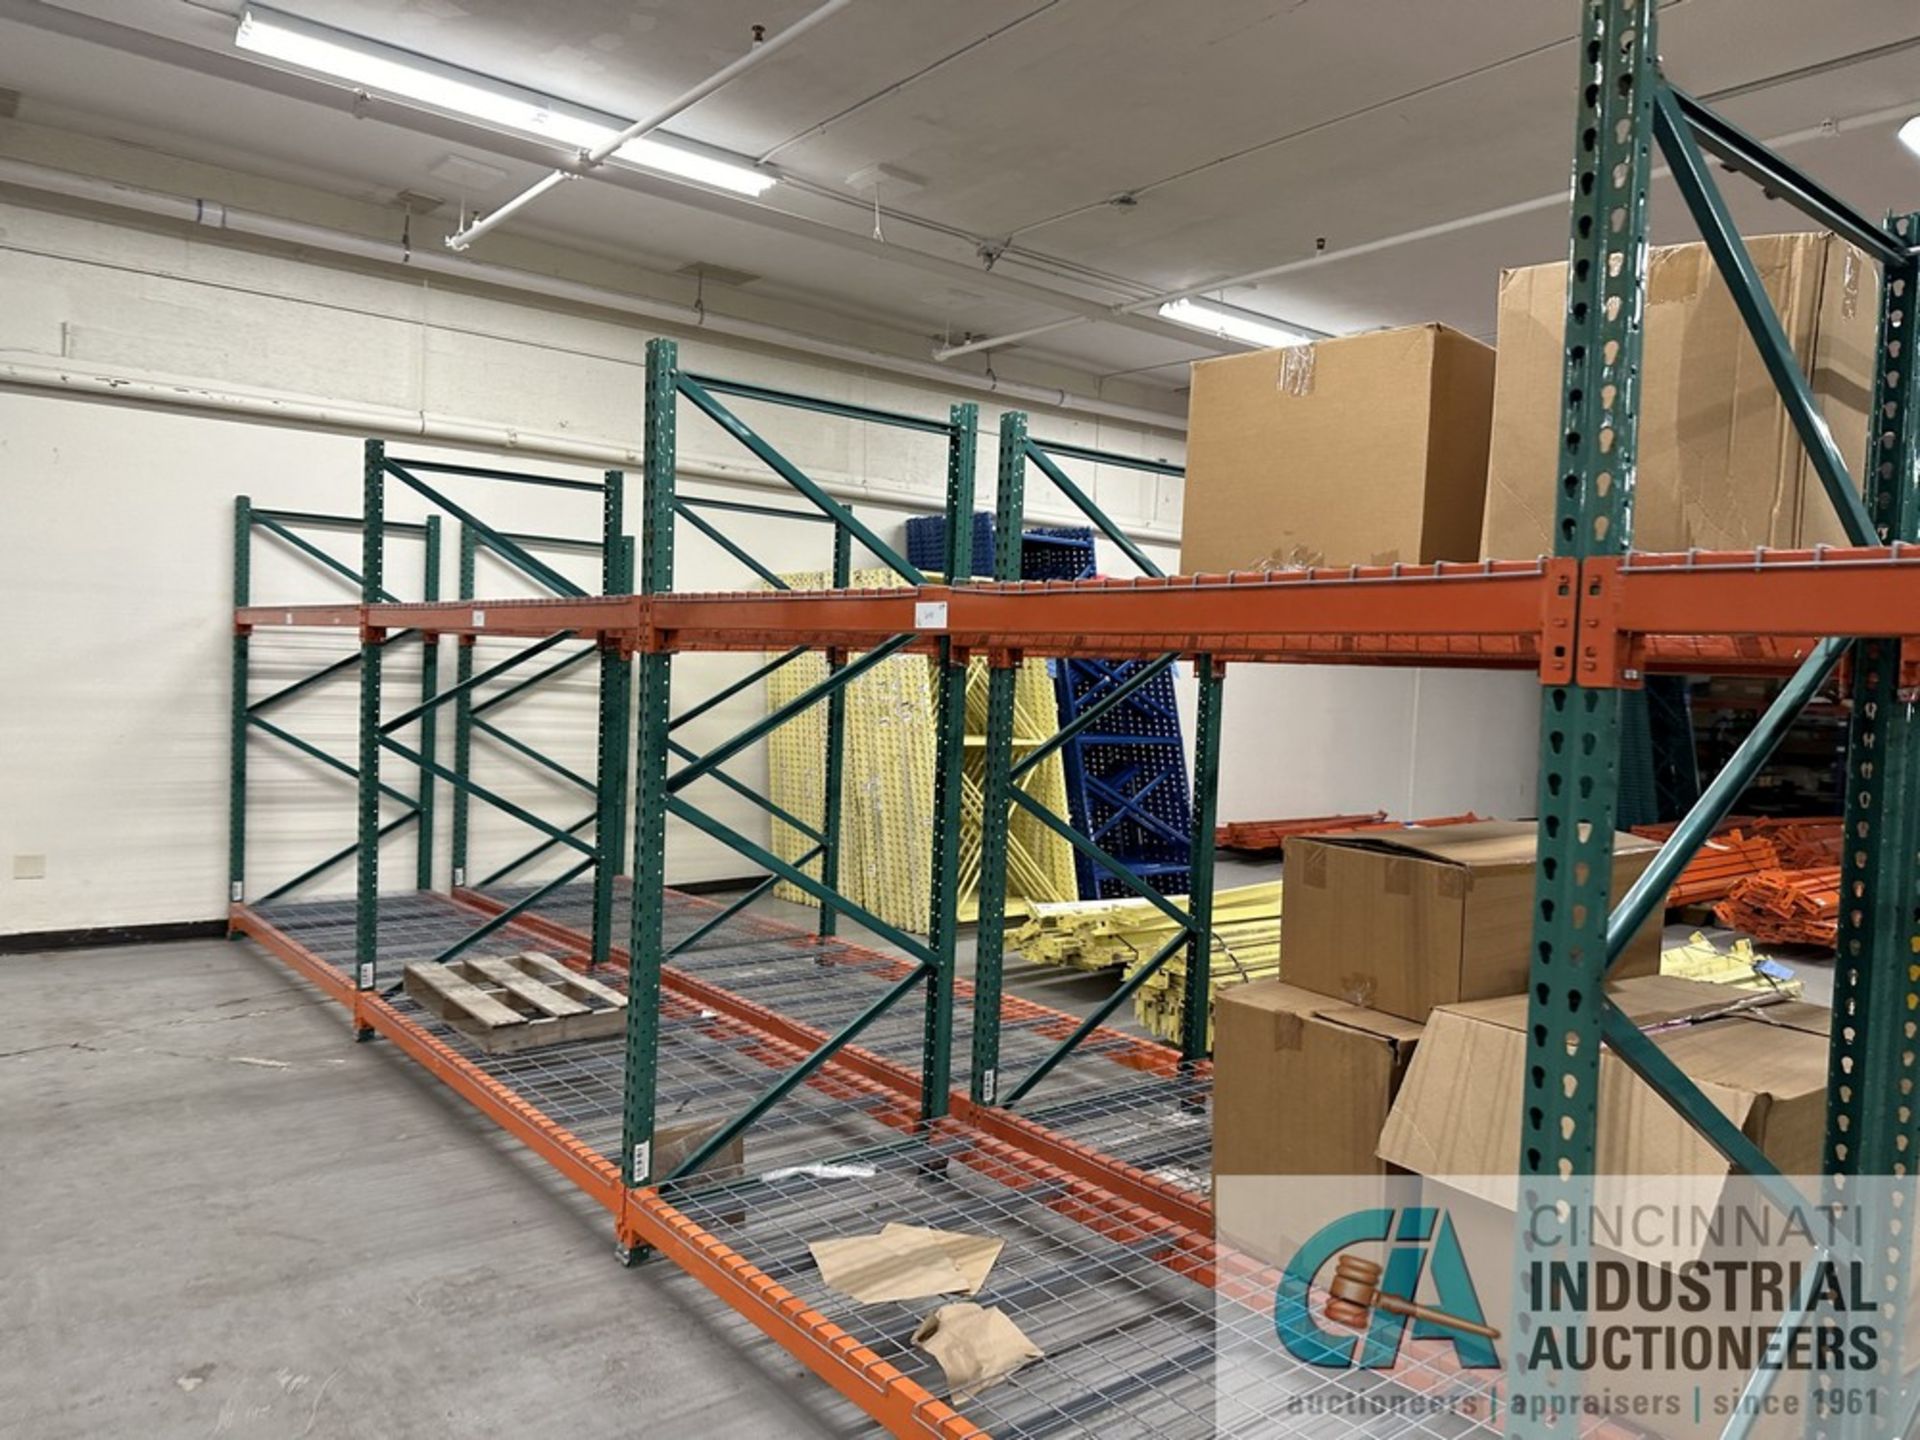 (LOT) (8) SECTIONS 96" X 42" X 96" AND (2) SECTIONS 72" X 42" X 96" ADJUSTABLE BEAM PALLET RACK - Image 6 of 8